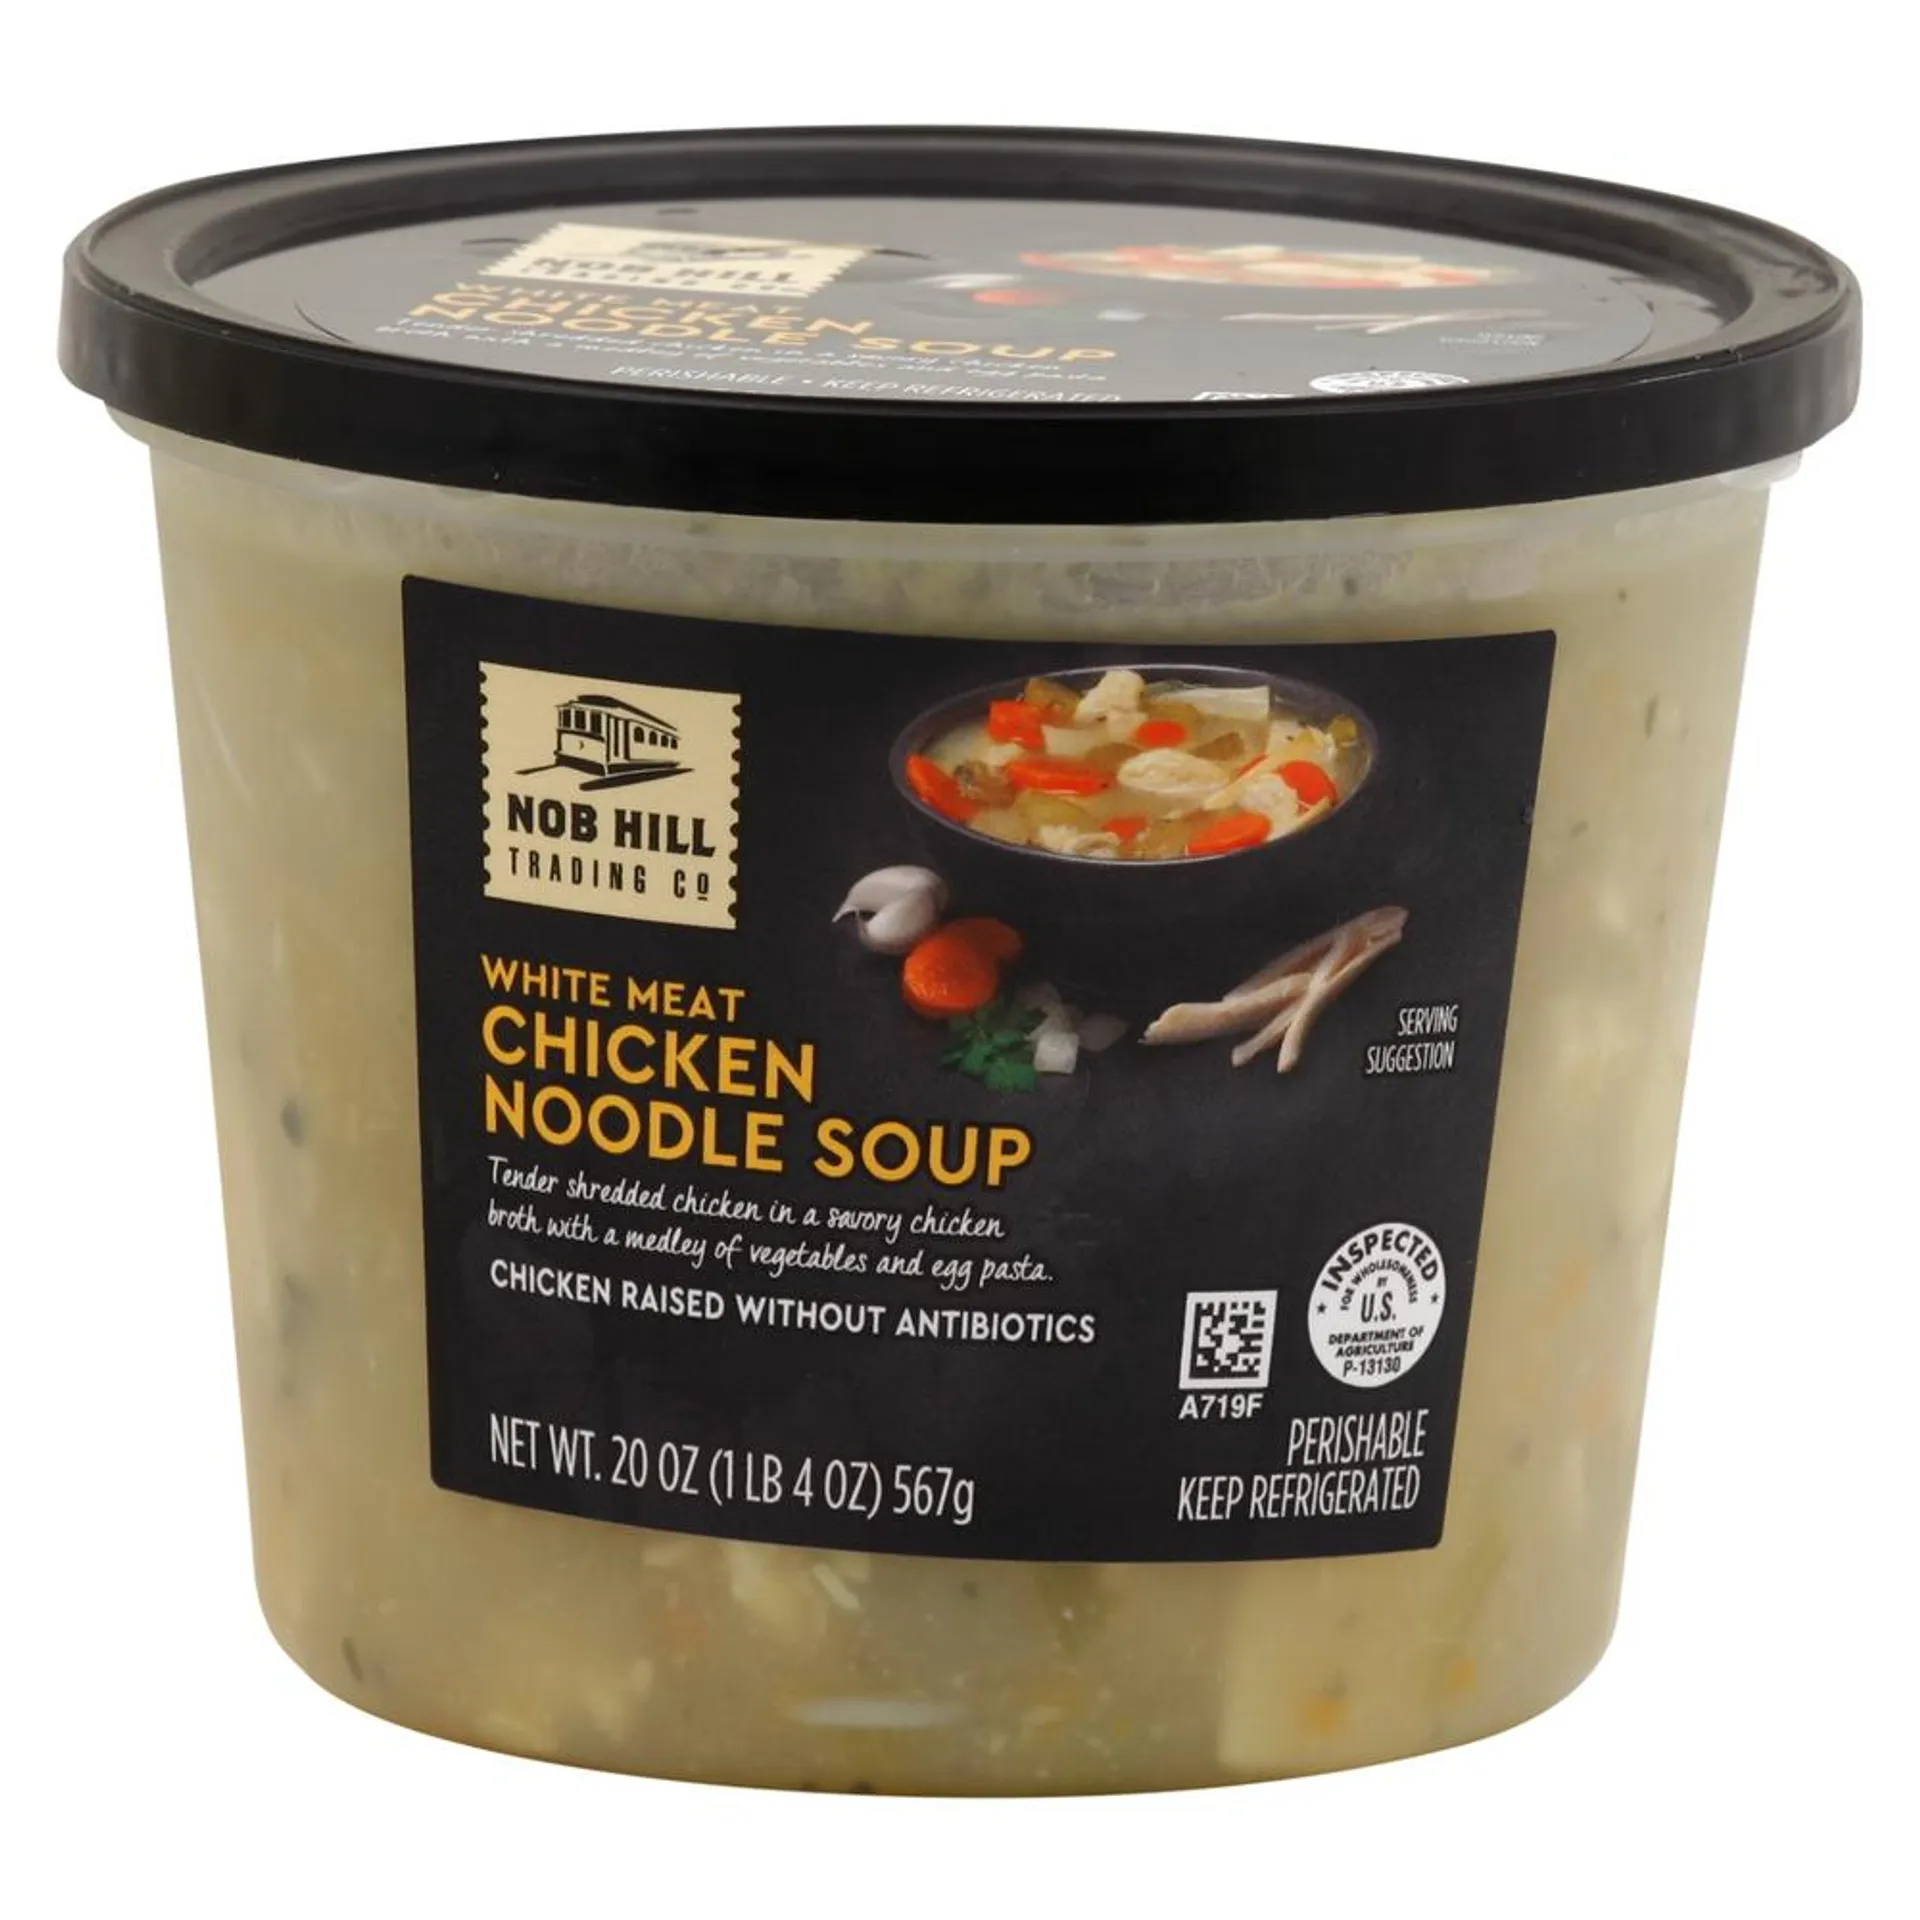 Nob Hill Trading Co. Soup, Chicken Noodle, White Meat